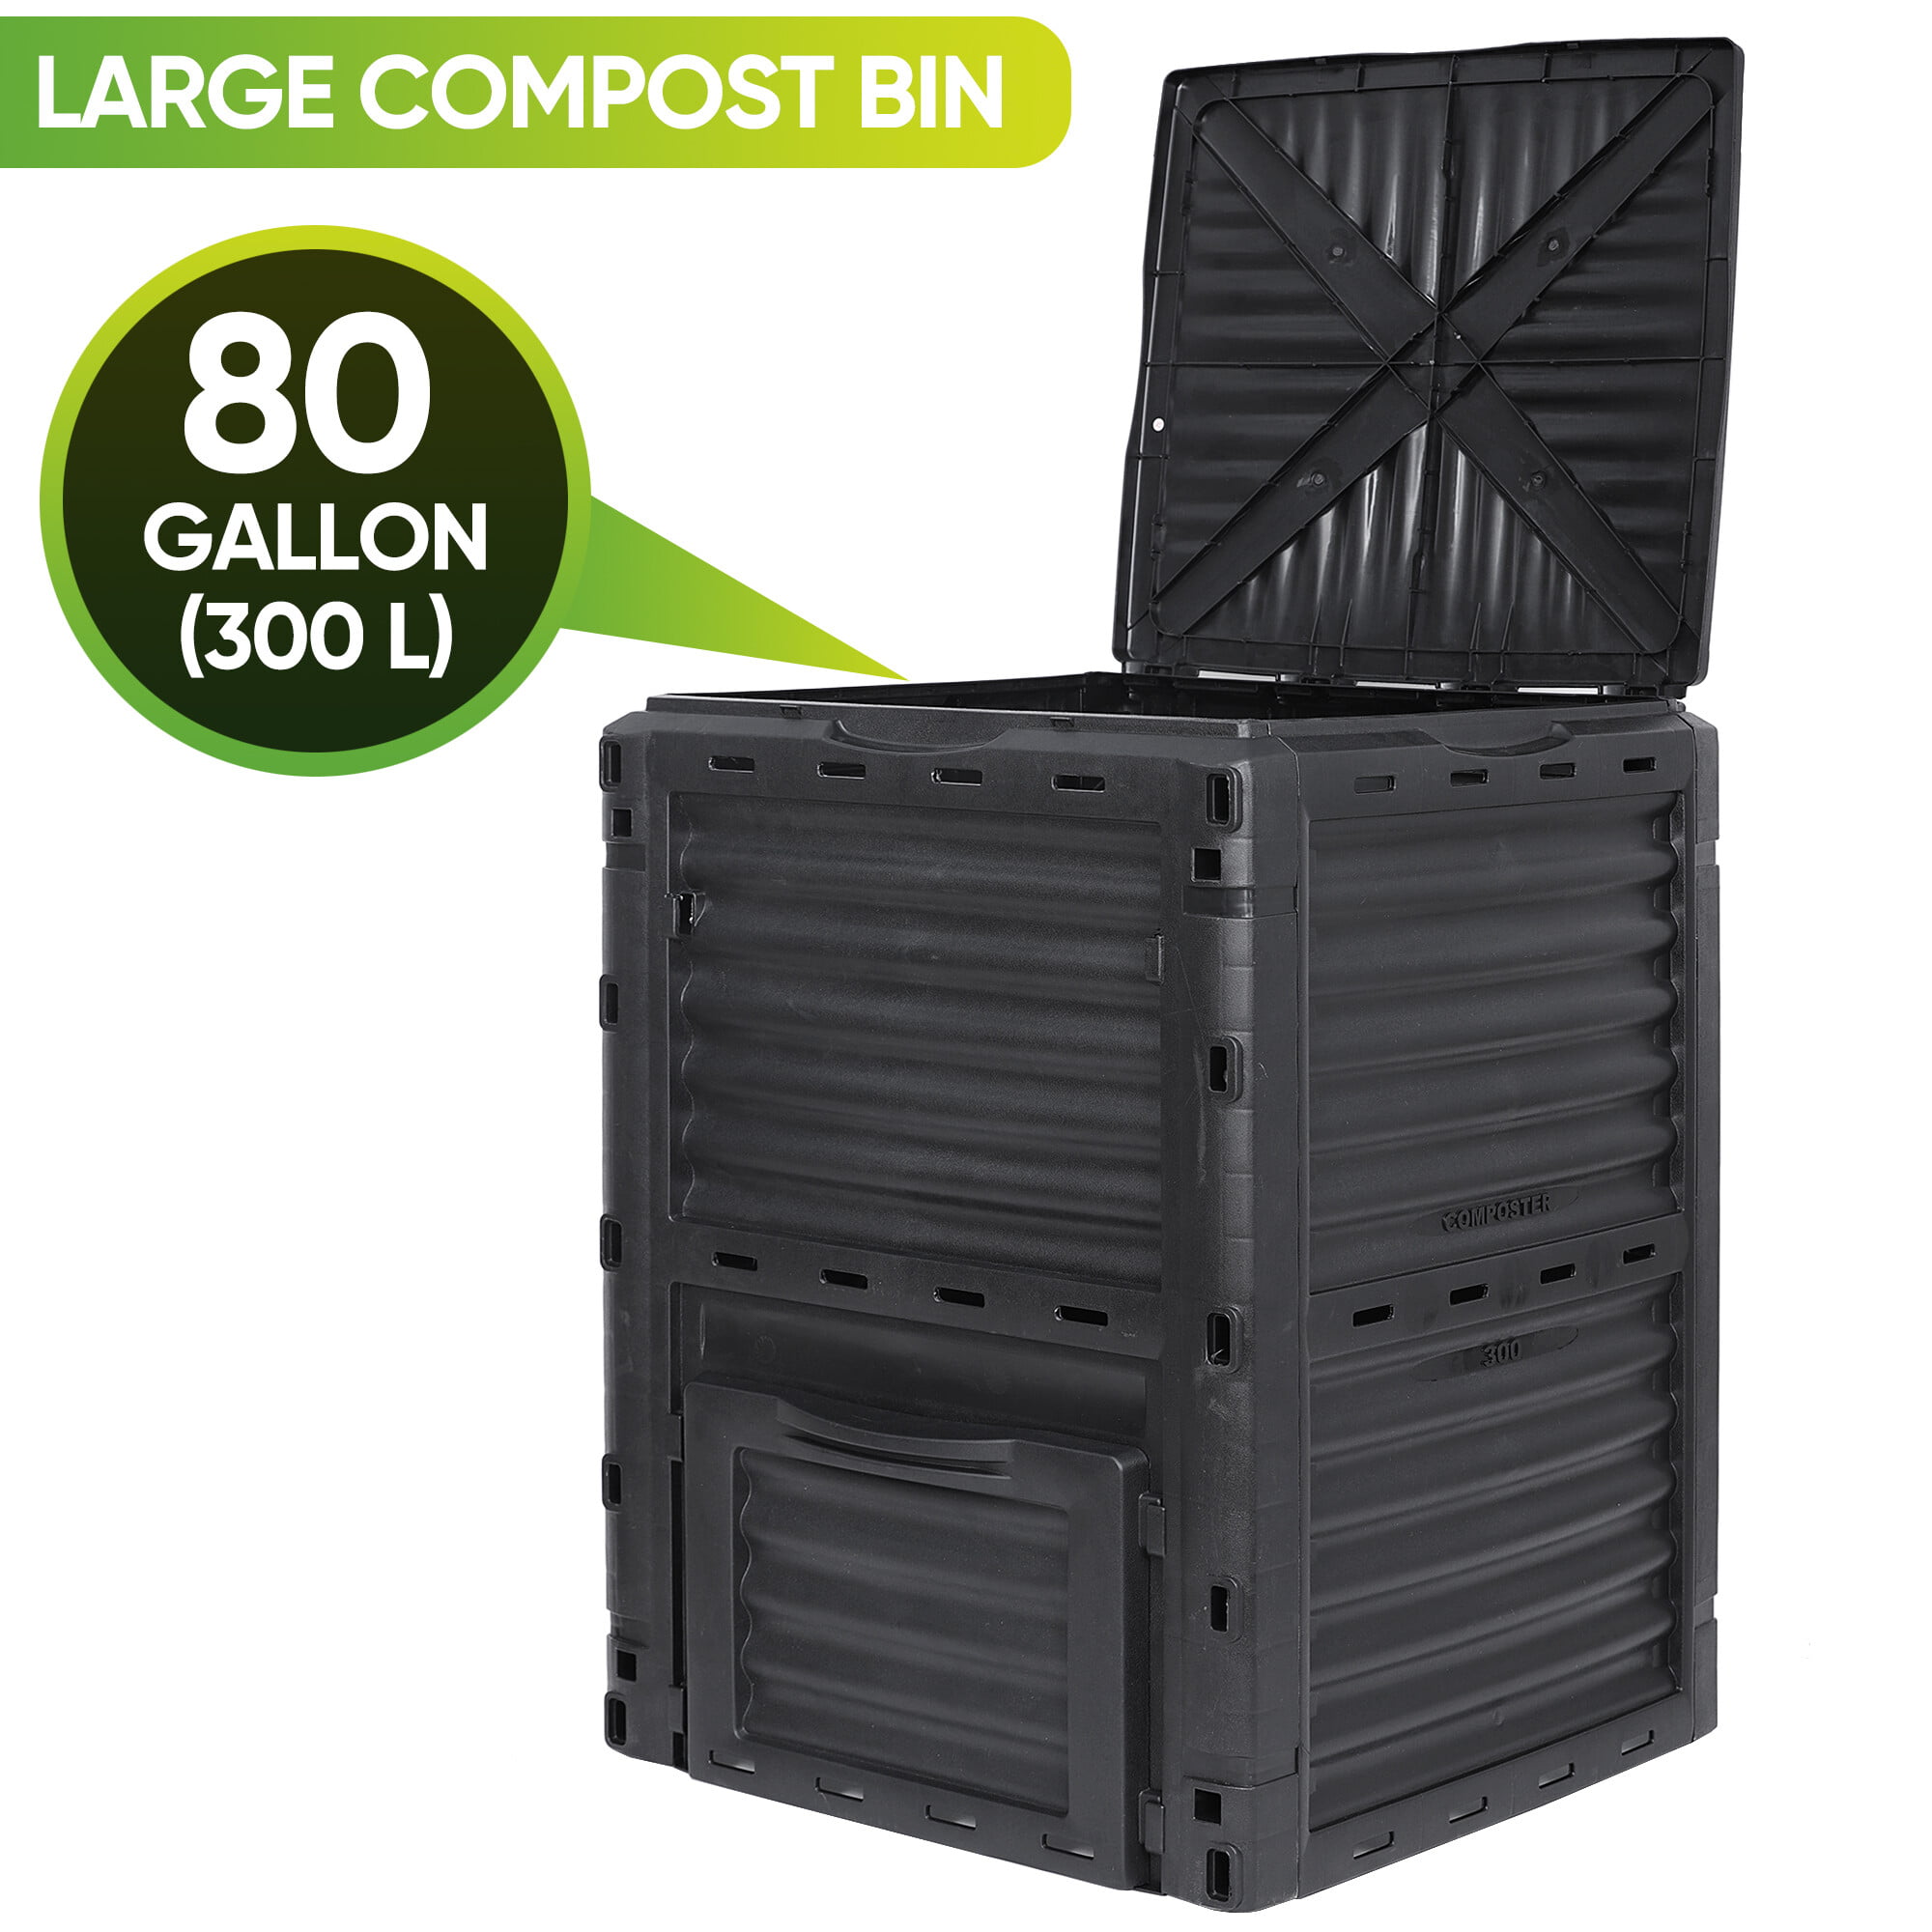 Saturnpower Garden Compost Bin 80 Gallon Outdoor Composter W/ Large Capacity & Easy Assembling Fast Creation of Fertile Soil 